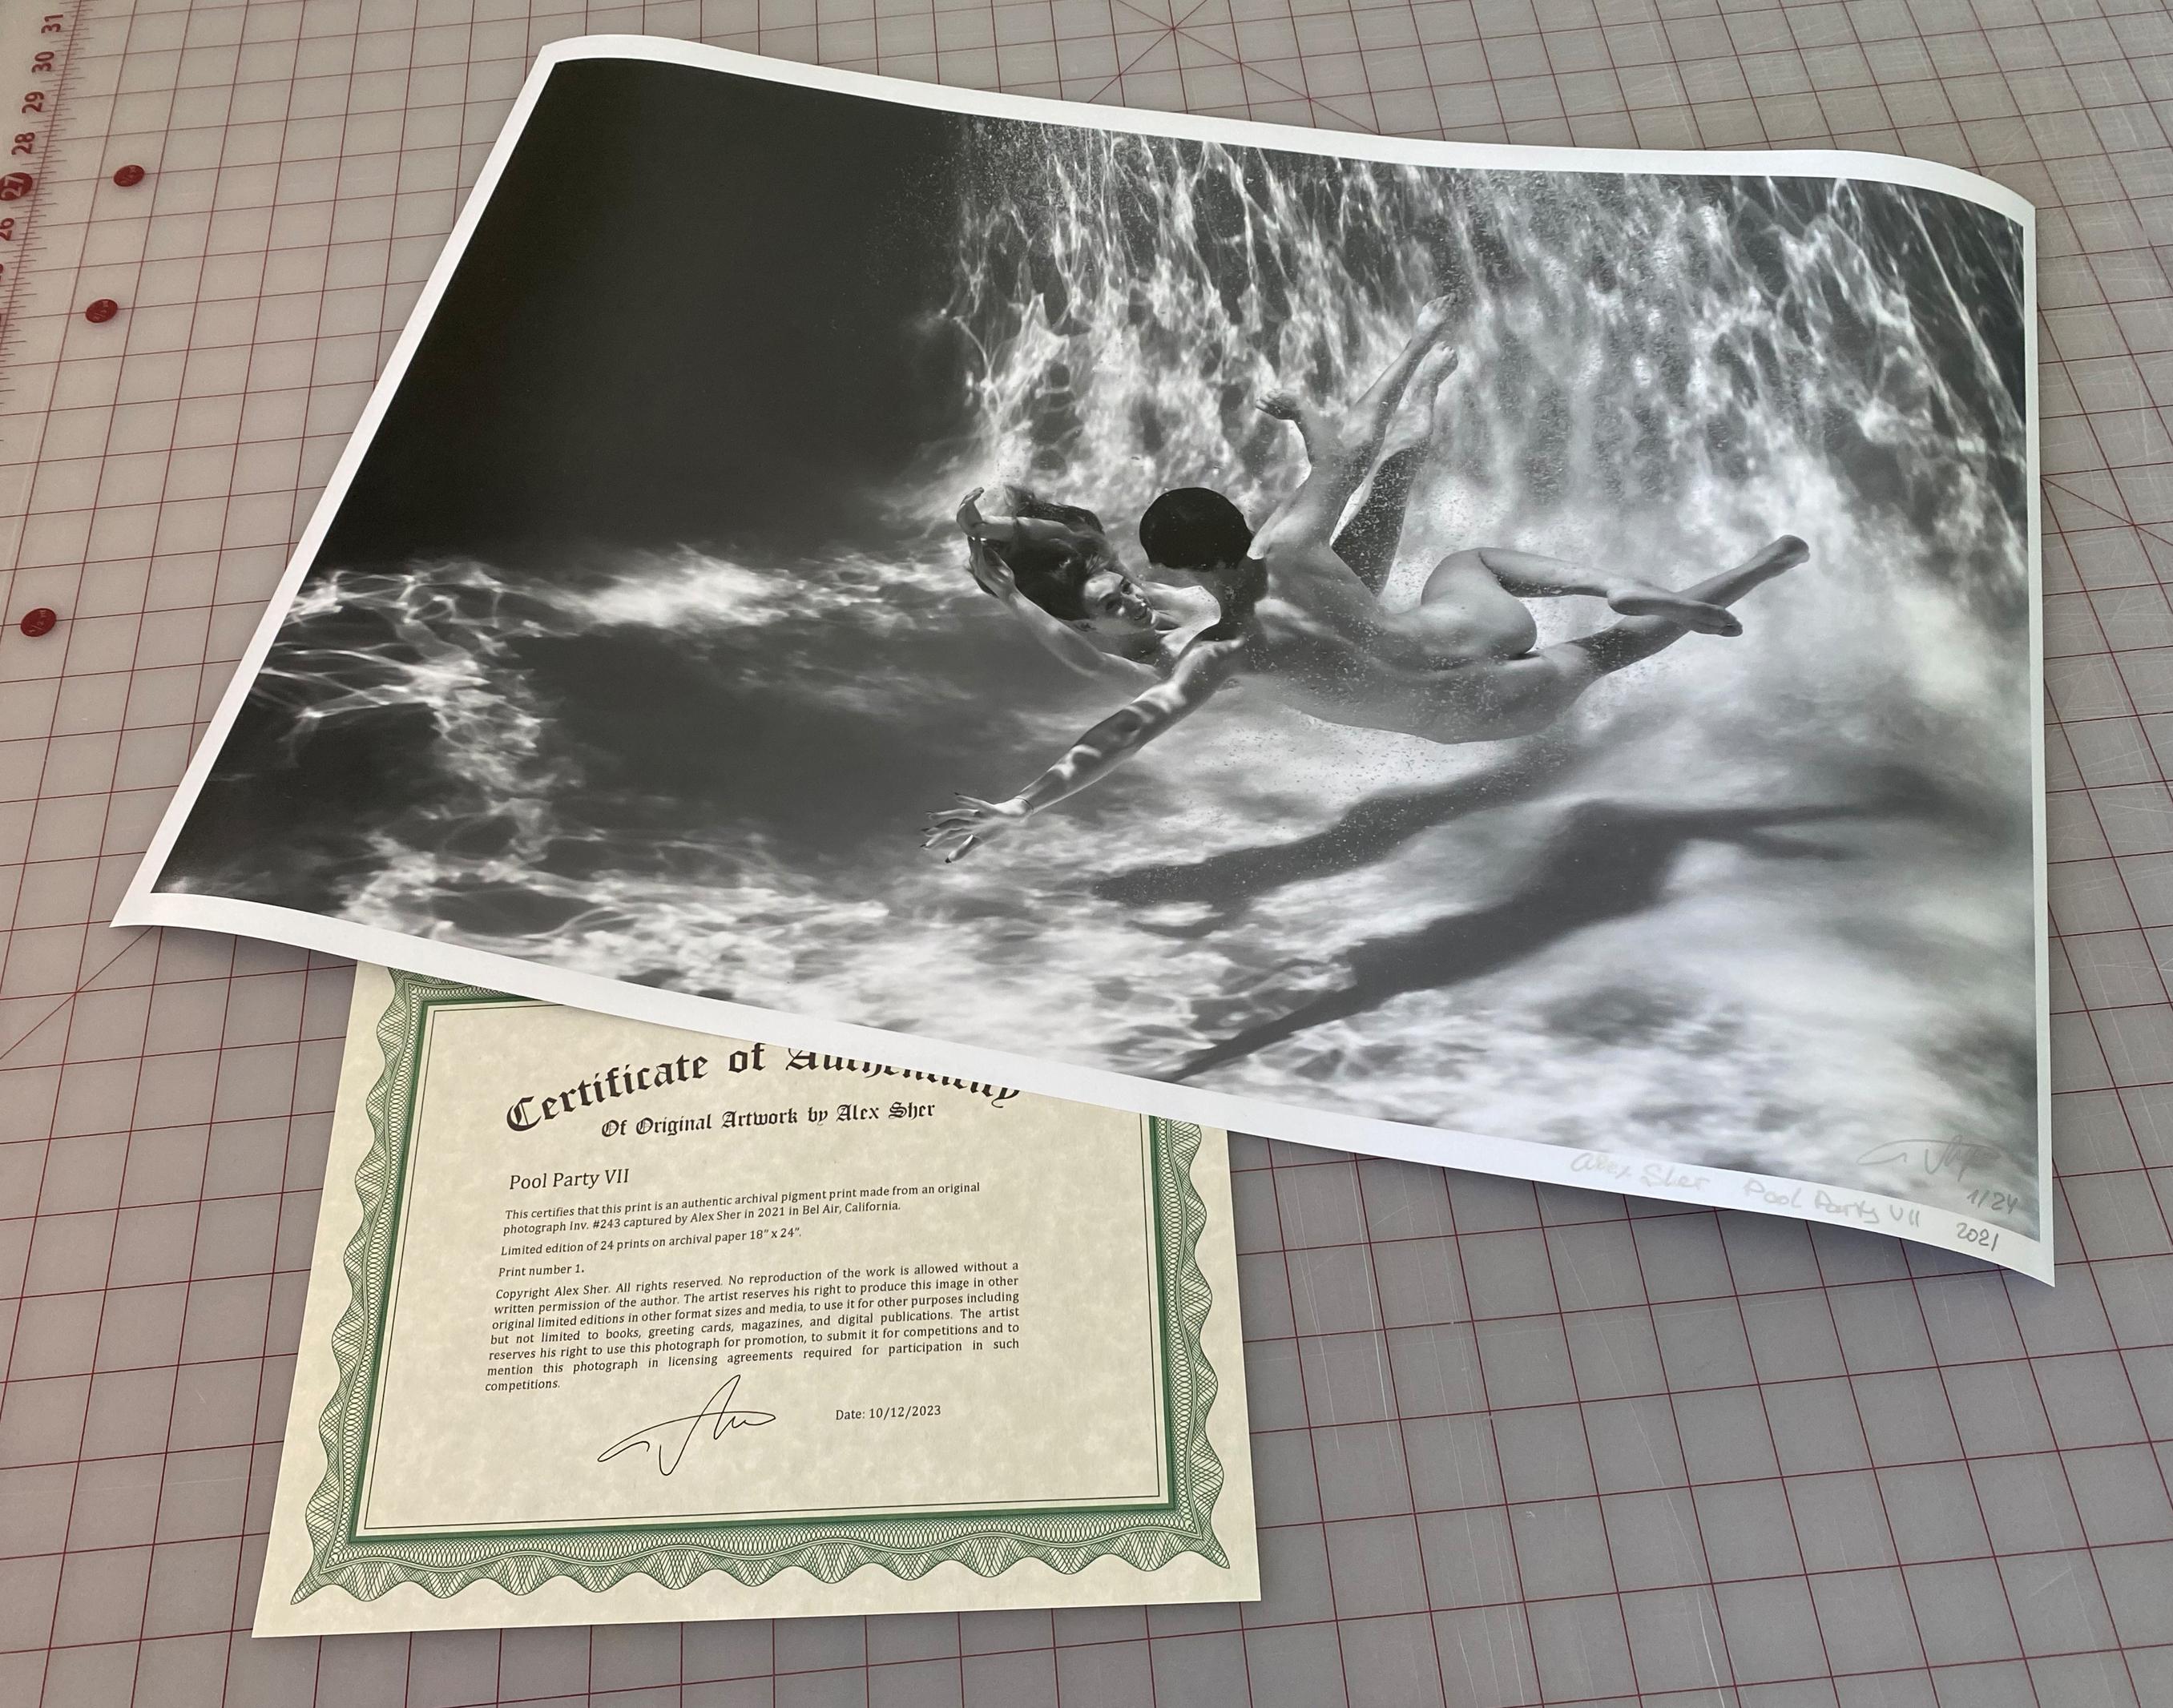 An underwater black and white photograph of young women diving naked in a pool. 

Original gallery quality archival pigment print on archival paper signed by the artist.
Limited edition of 24
Paper size: 18x24